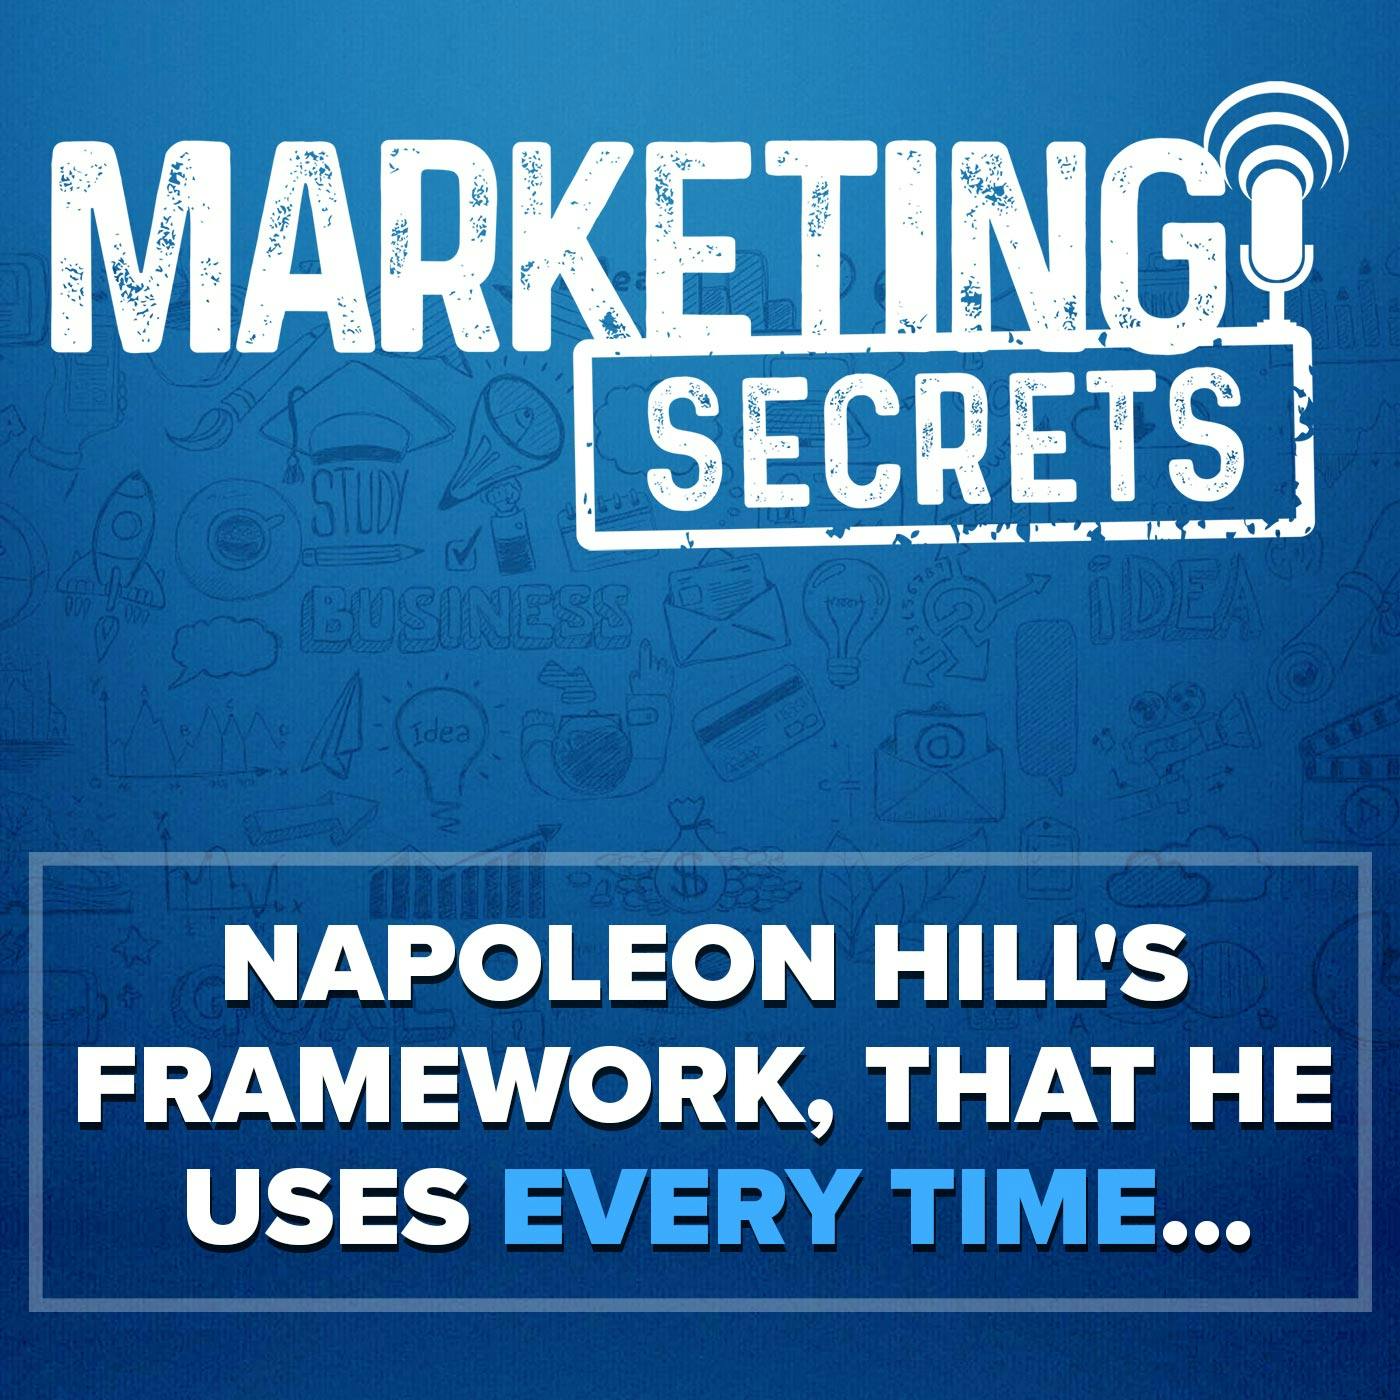 Napoleon Hill's Framework, That He Uses Every Time...